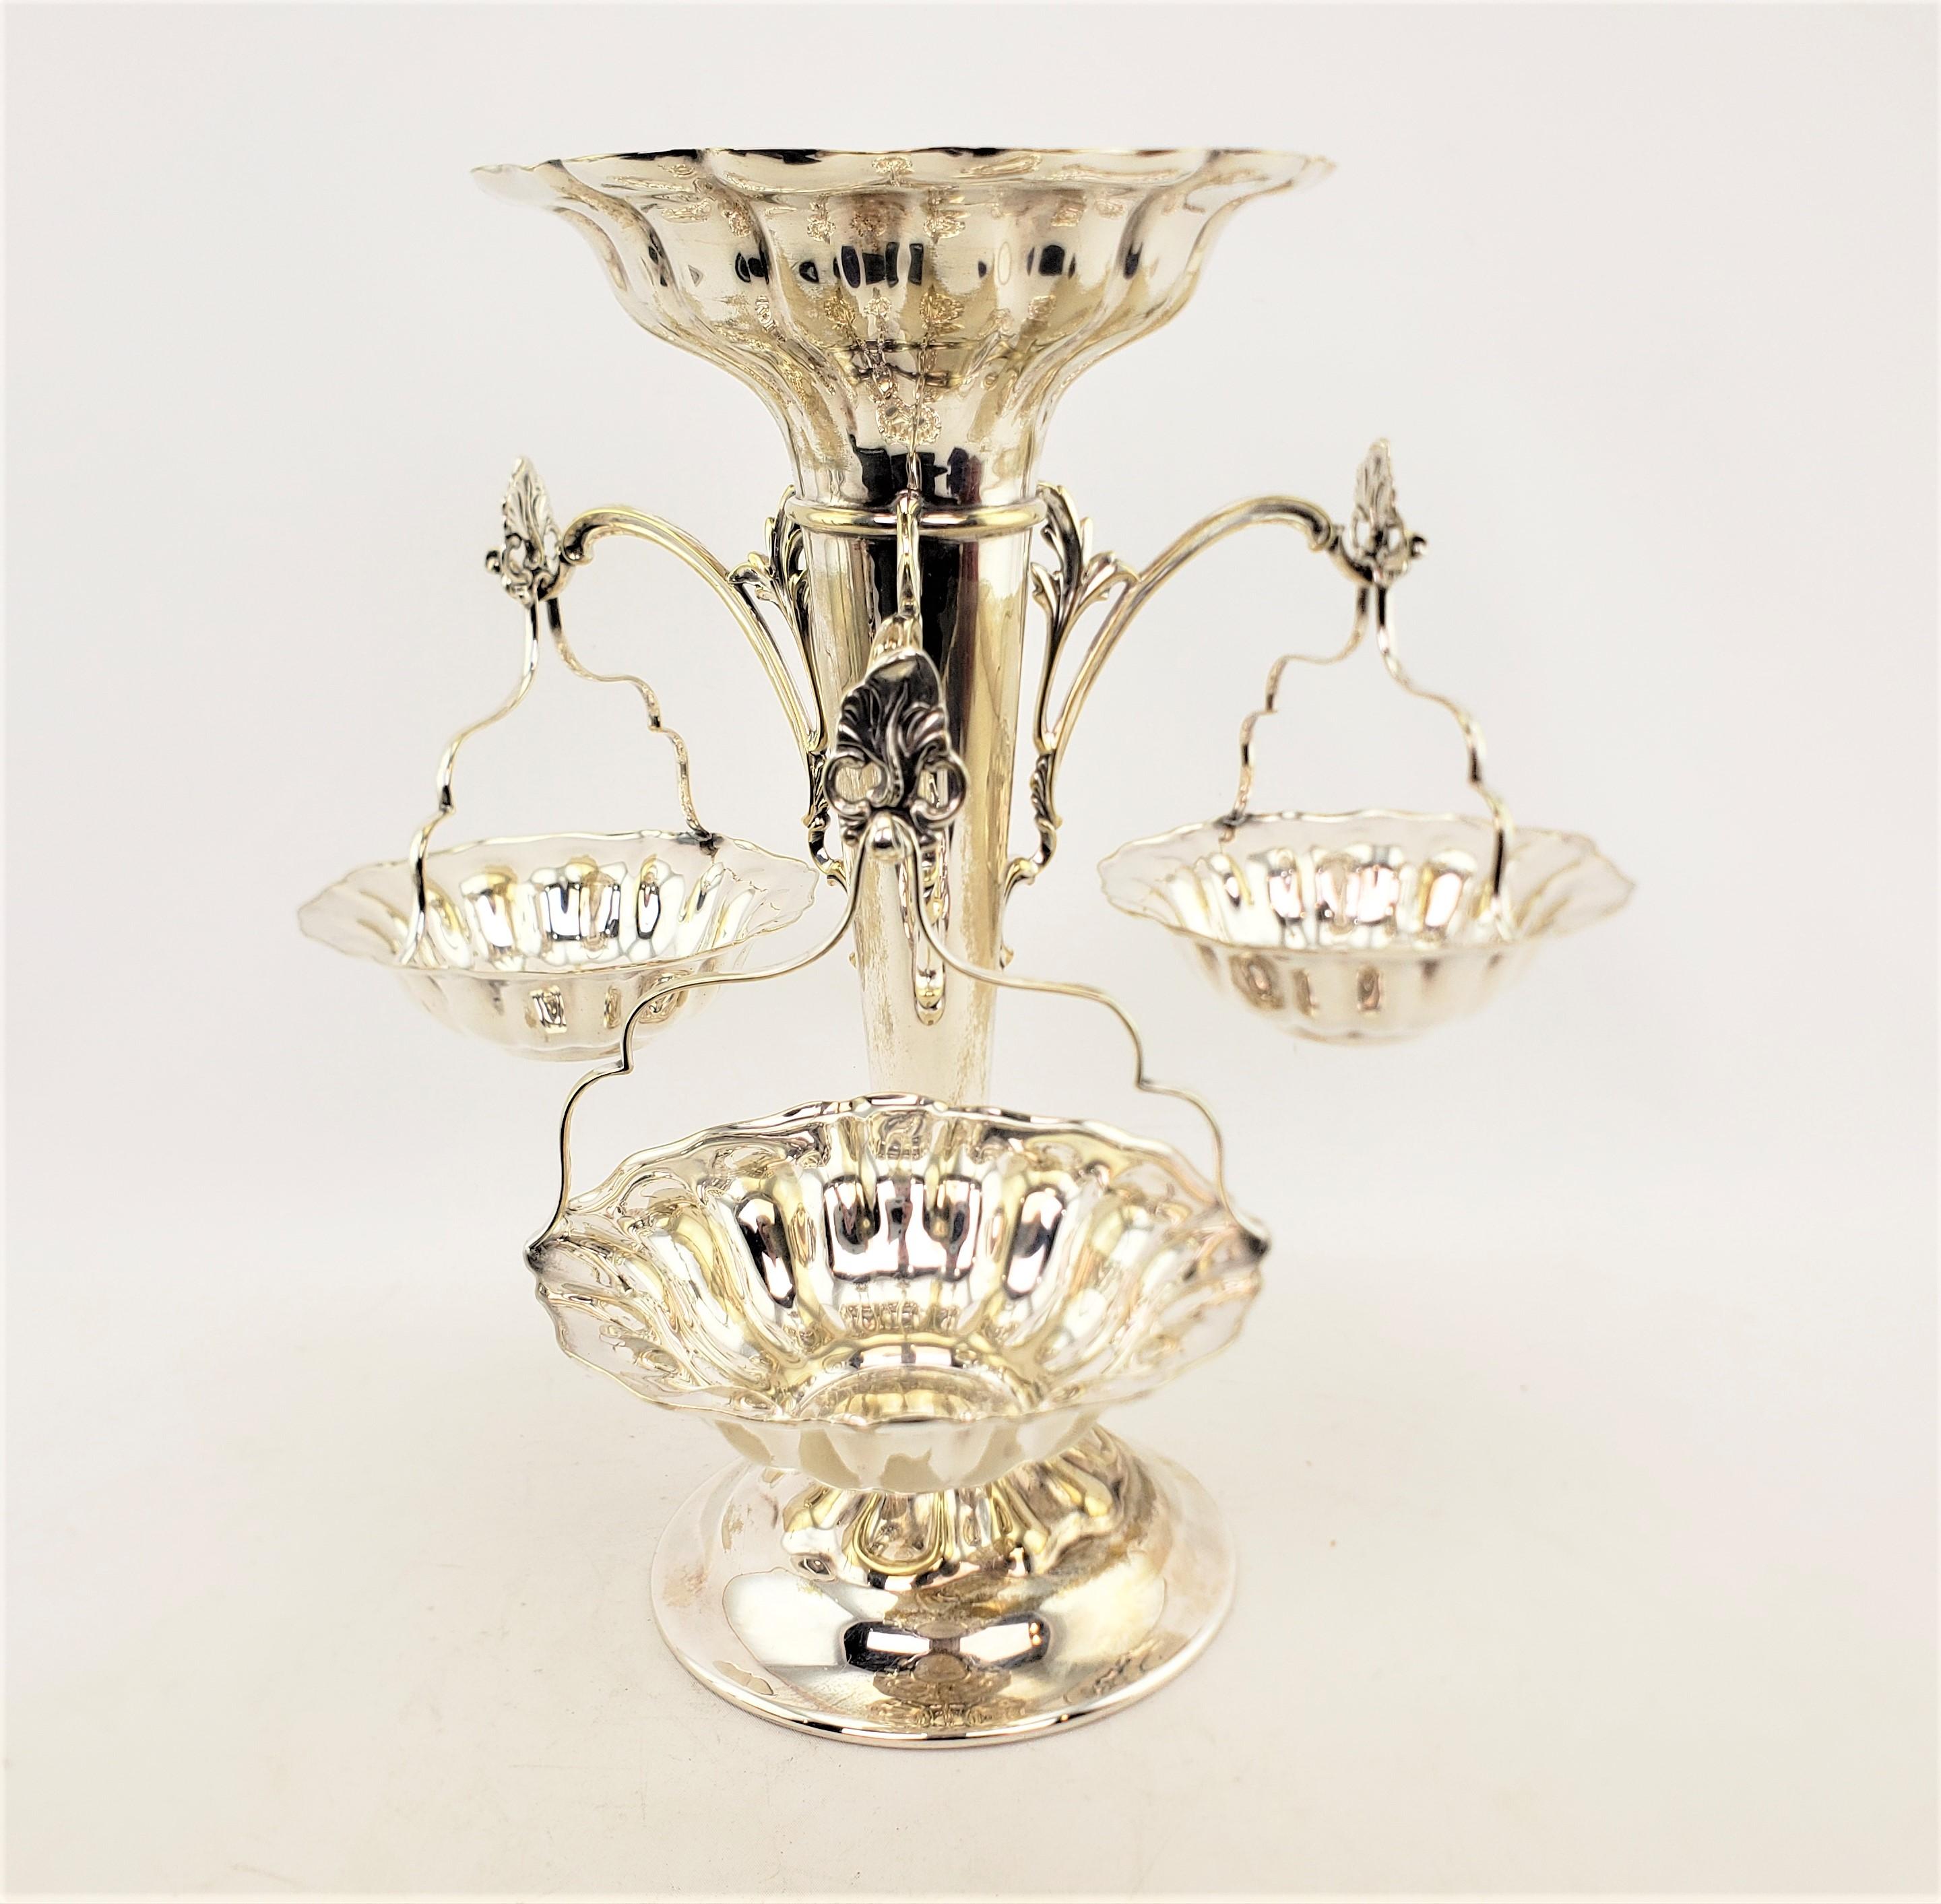 This antique silver plated epergne was made by the Elkington Plate Co. of England, and dating to approximately 1920 and done in a Victorian style. The epergne or centerpiece is made with a central trumpet vase with a scalloped base, and three